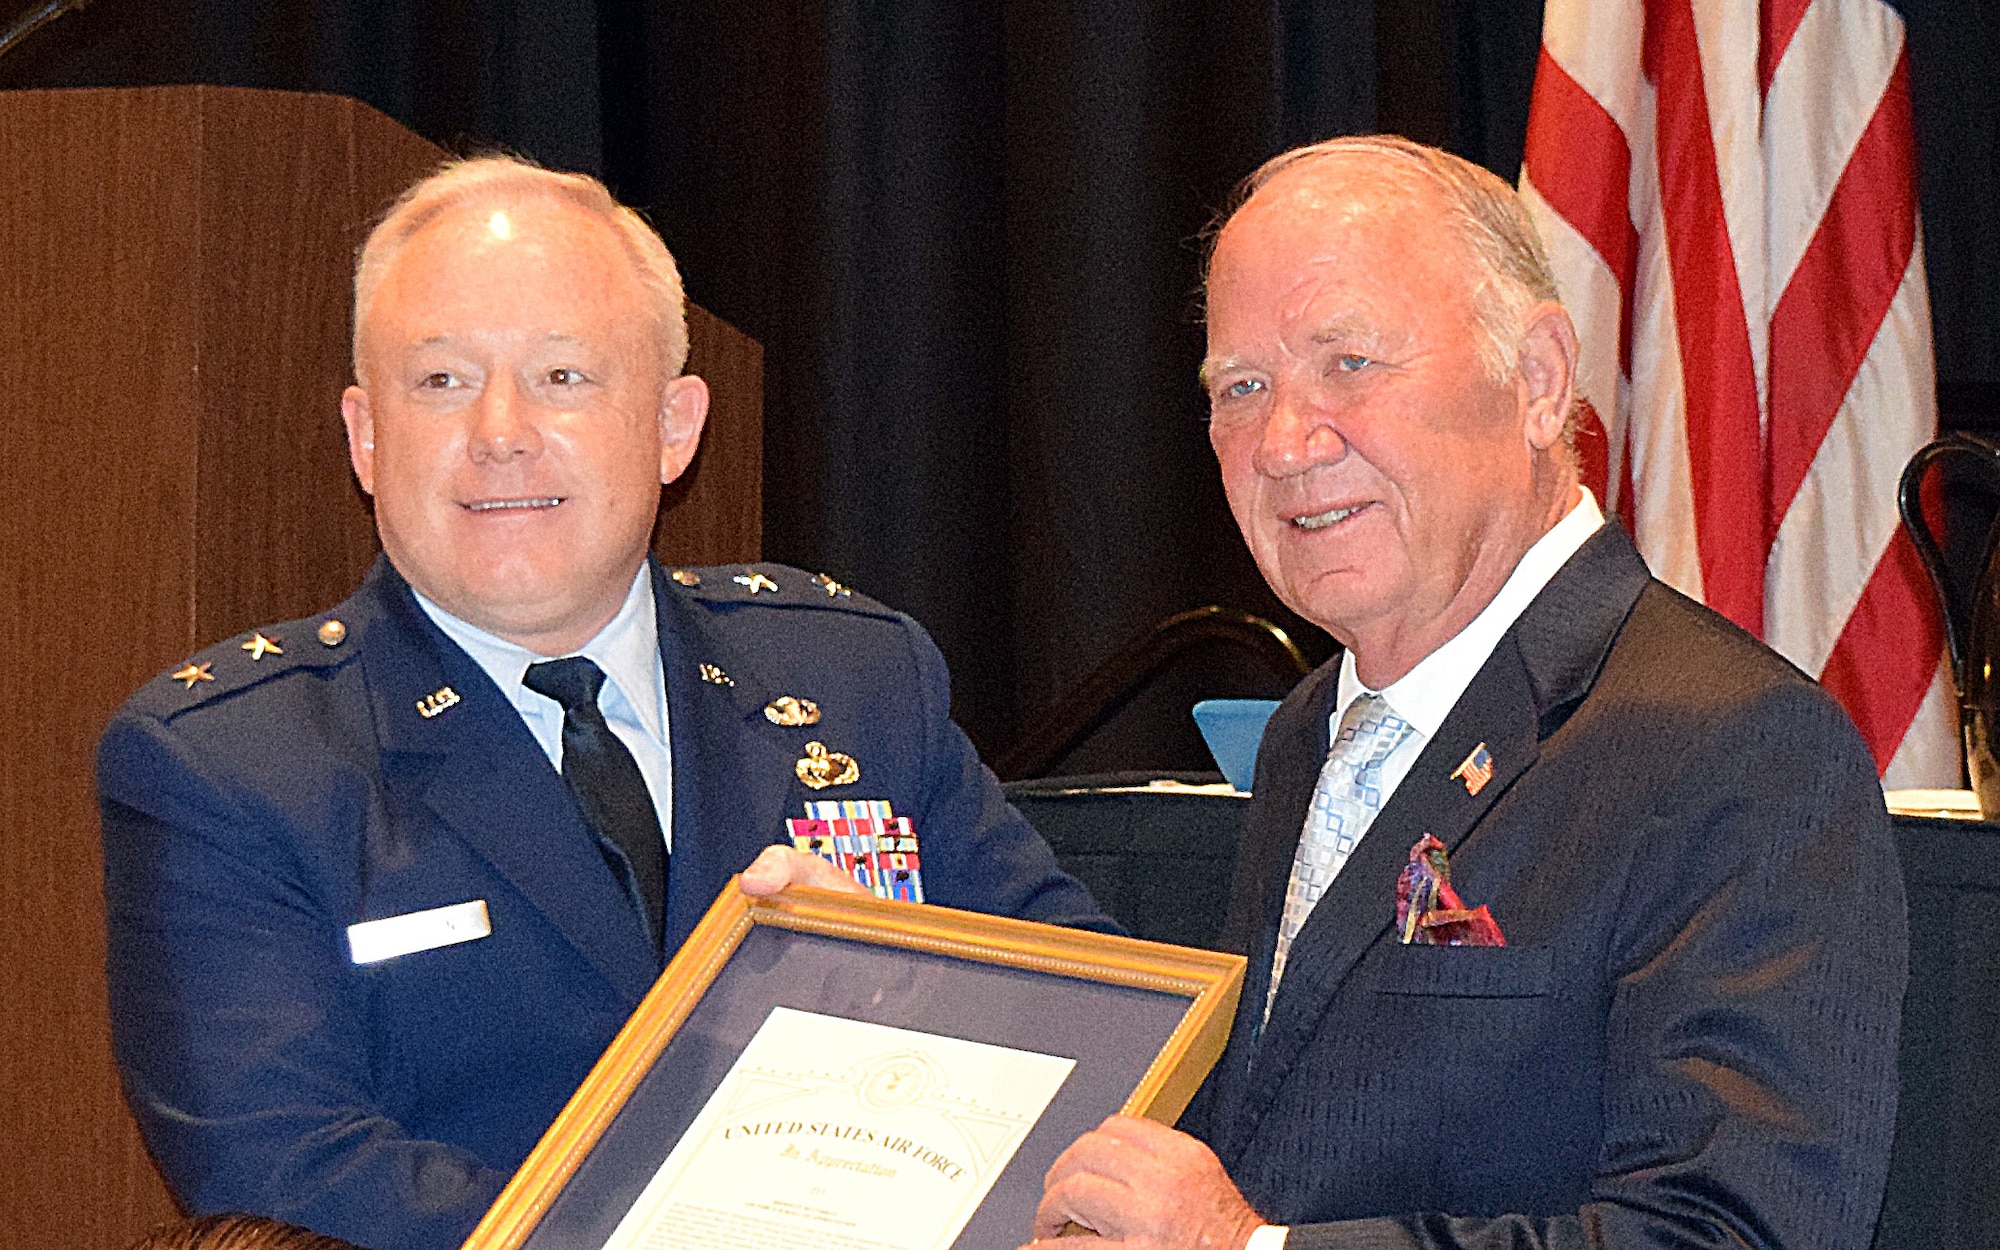 Maj. Gen. Scott Jansson, Air Force Nuclear Weapons Center commander, left, presented Sherman McCorkle, Kirtland Partnership Committee vice chair, with the Air Force Scroll of Appreciation.